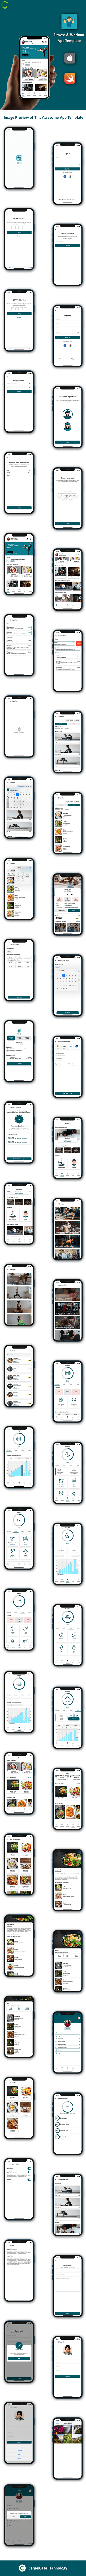 Fitness & Workout App Template in iOS Swift | FitBit - 4